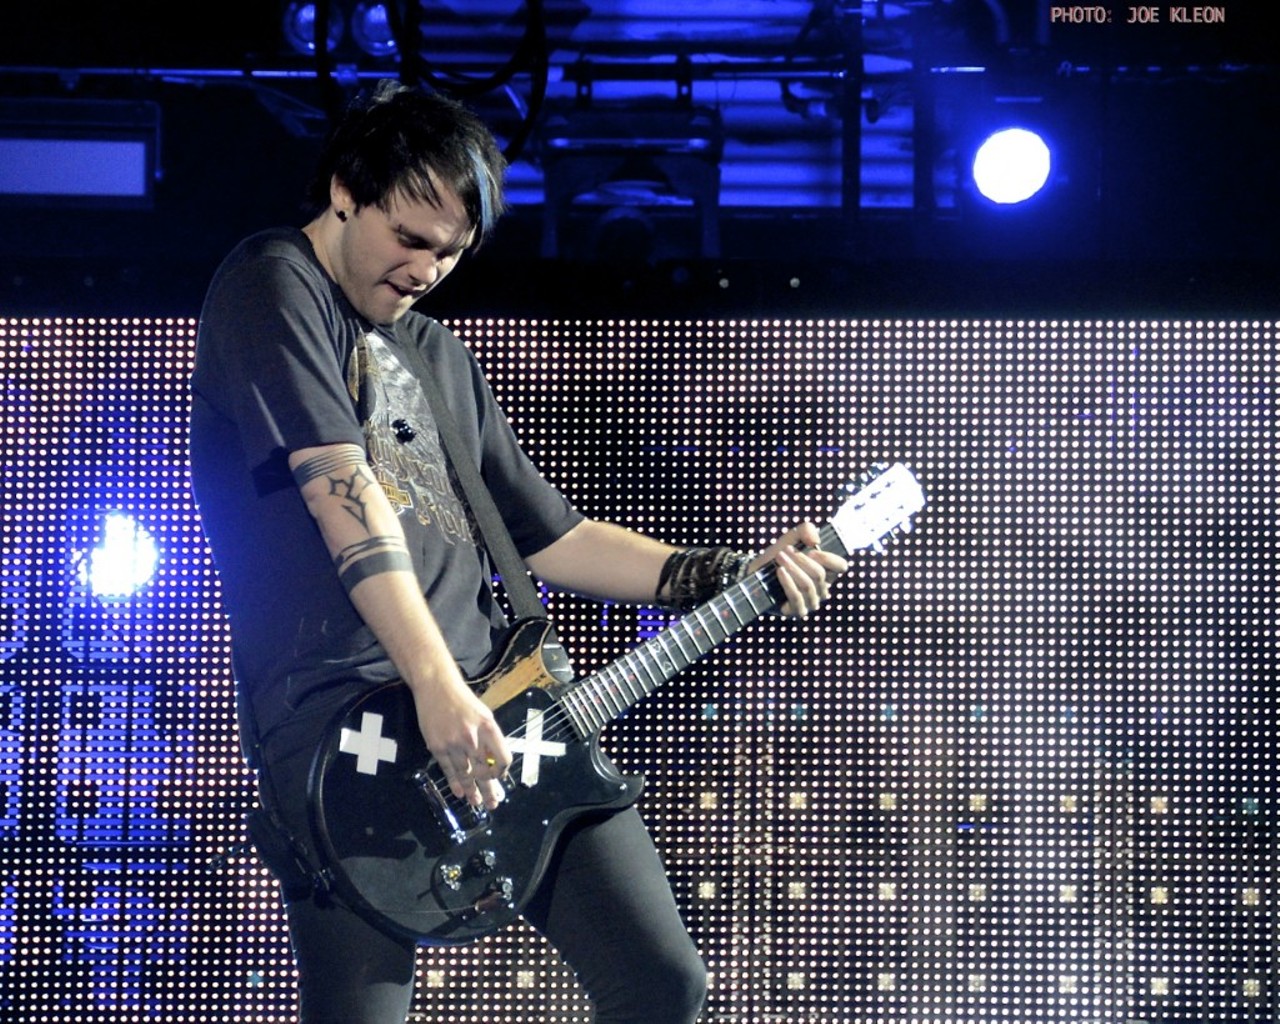 5 Seconds of Summer Performing at Quicken Loans Arena